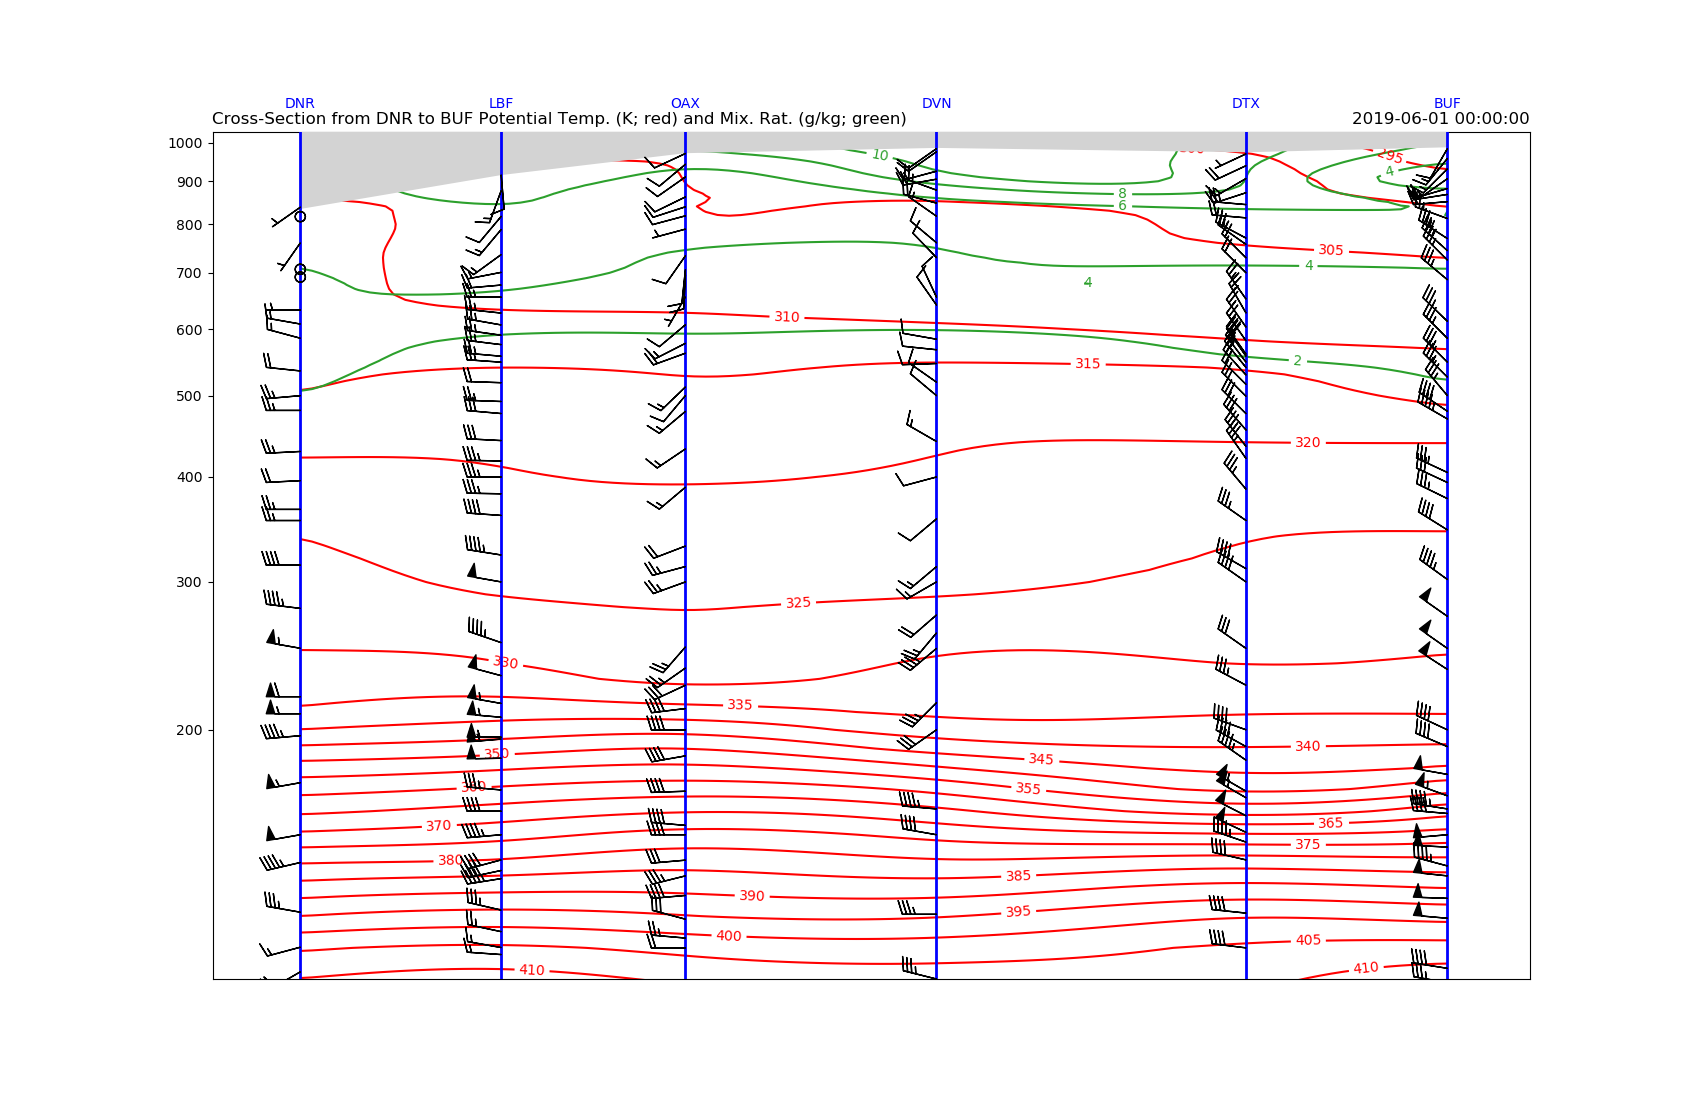 ../_images/sphx_glr_Observational_Data_Cross_Section_001.png